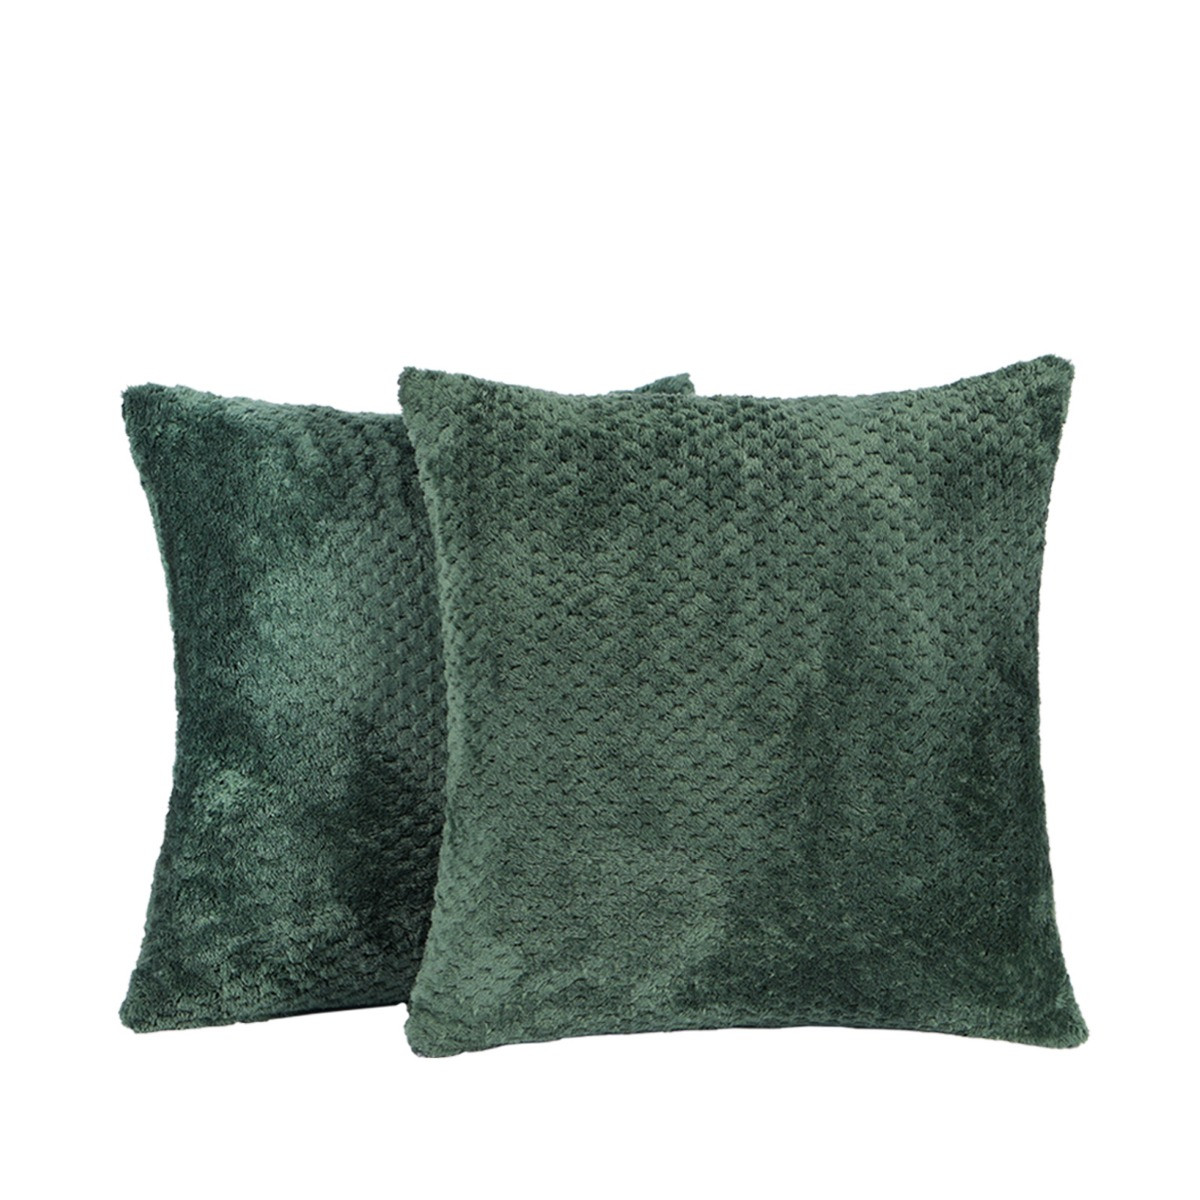 Brentfords 2 Pack Waffle Fleece Cushion Covers, Forest Green - 45 x 45cm>